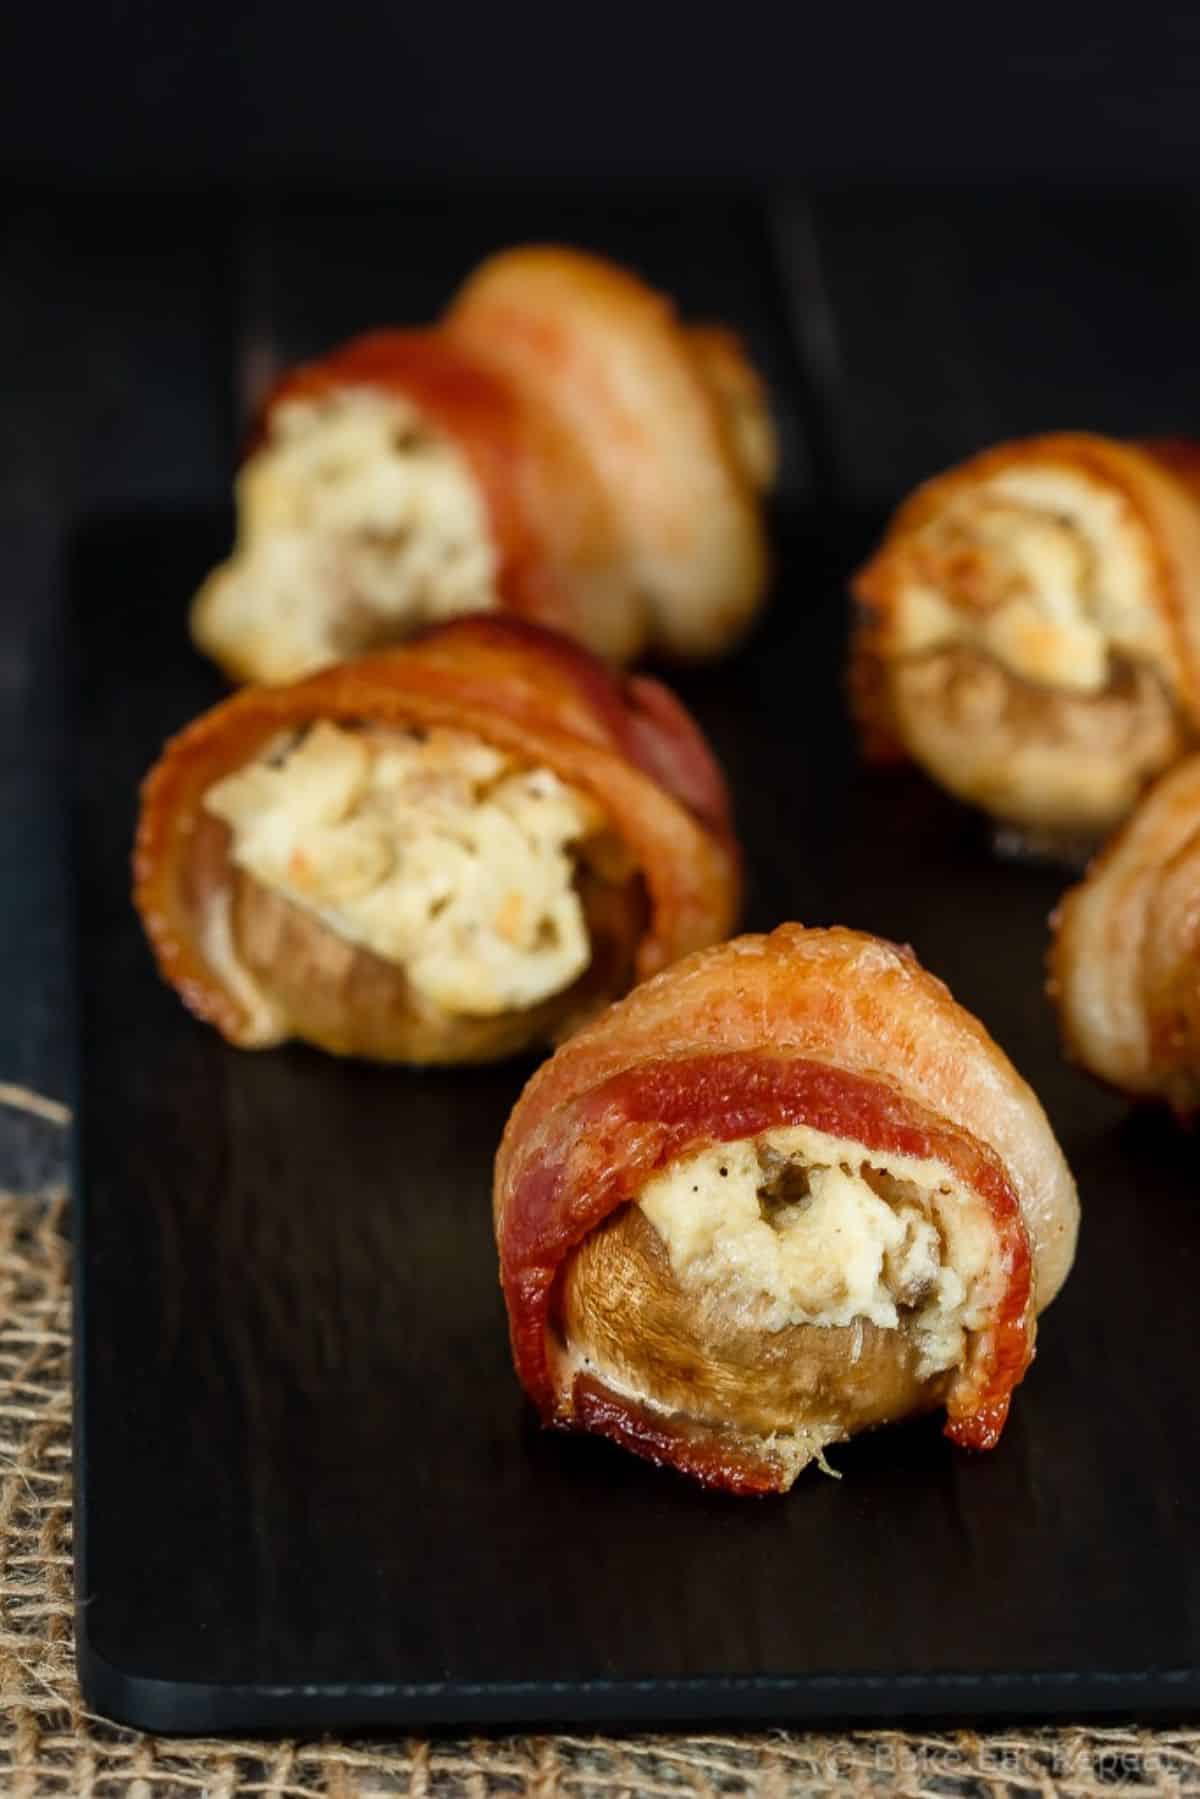 Scrumptious Bacon-Wrapped Crab-Stuffed Mushrooms on a black tray.